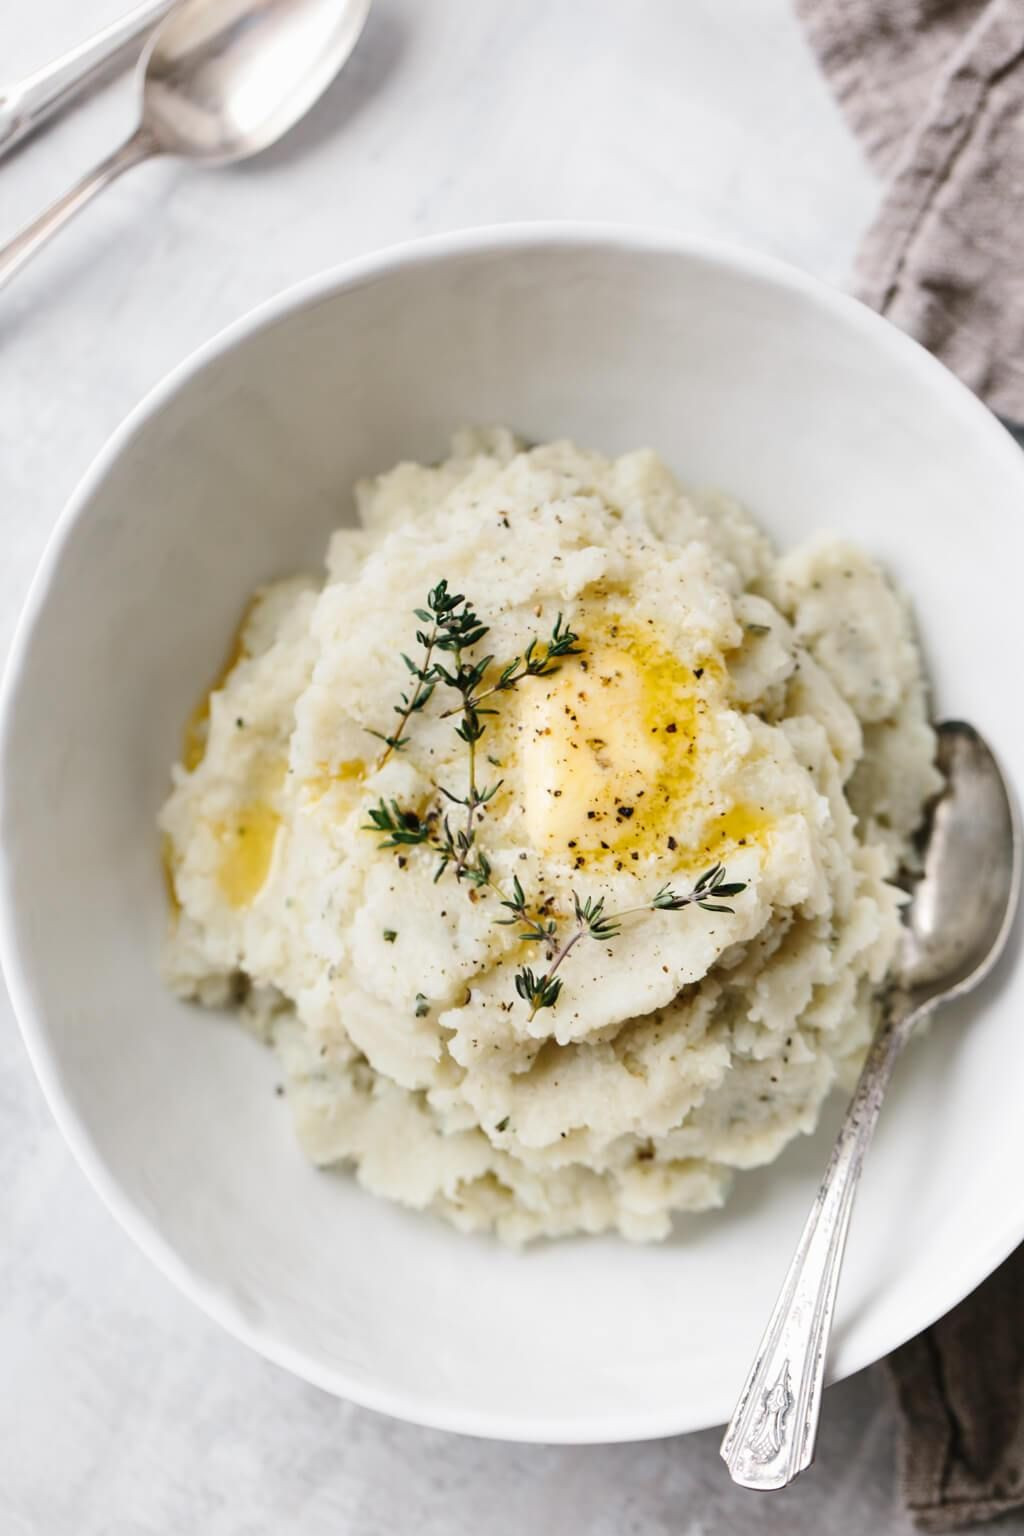 Recipes For Cauliflower Mashed Potatoes
 Mashed Cauliflower with Garlic and Herbs Recipe